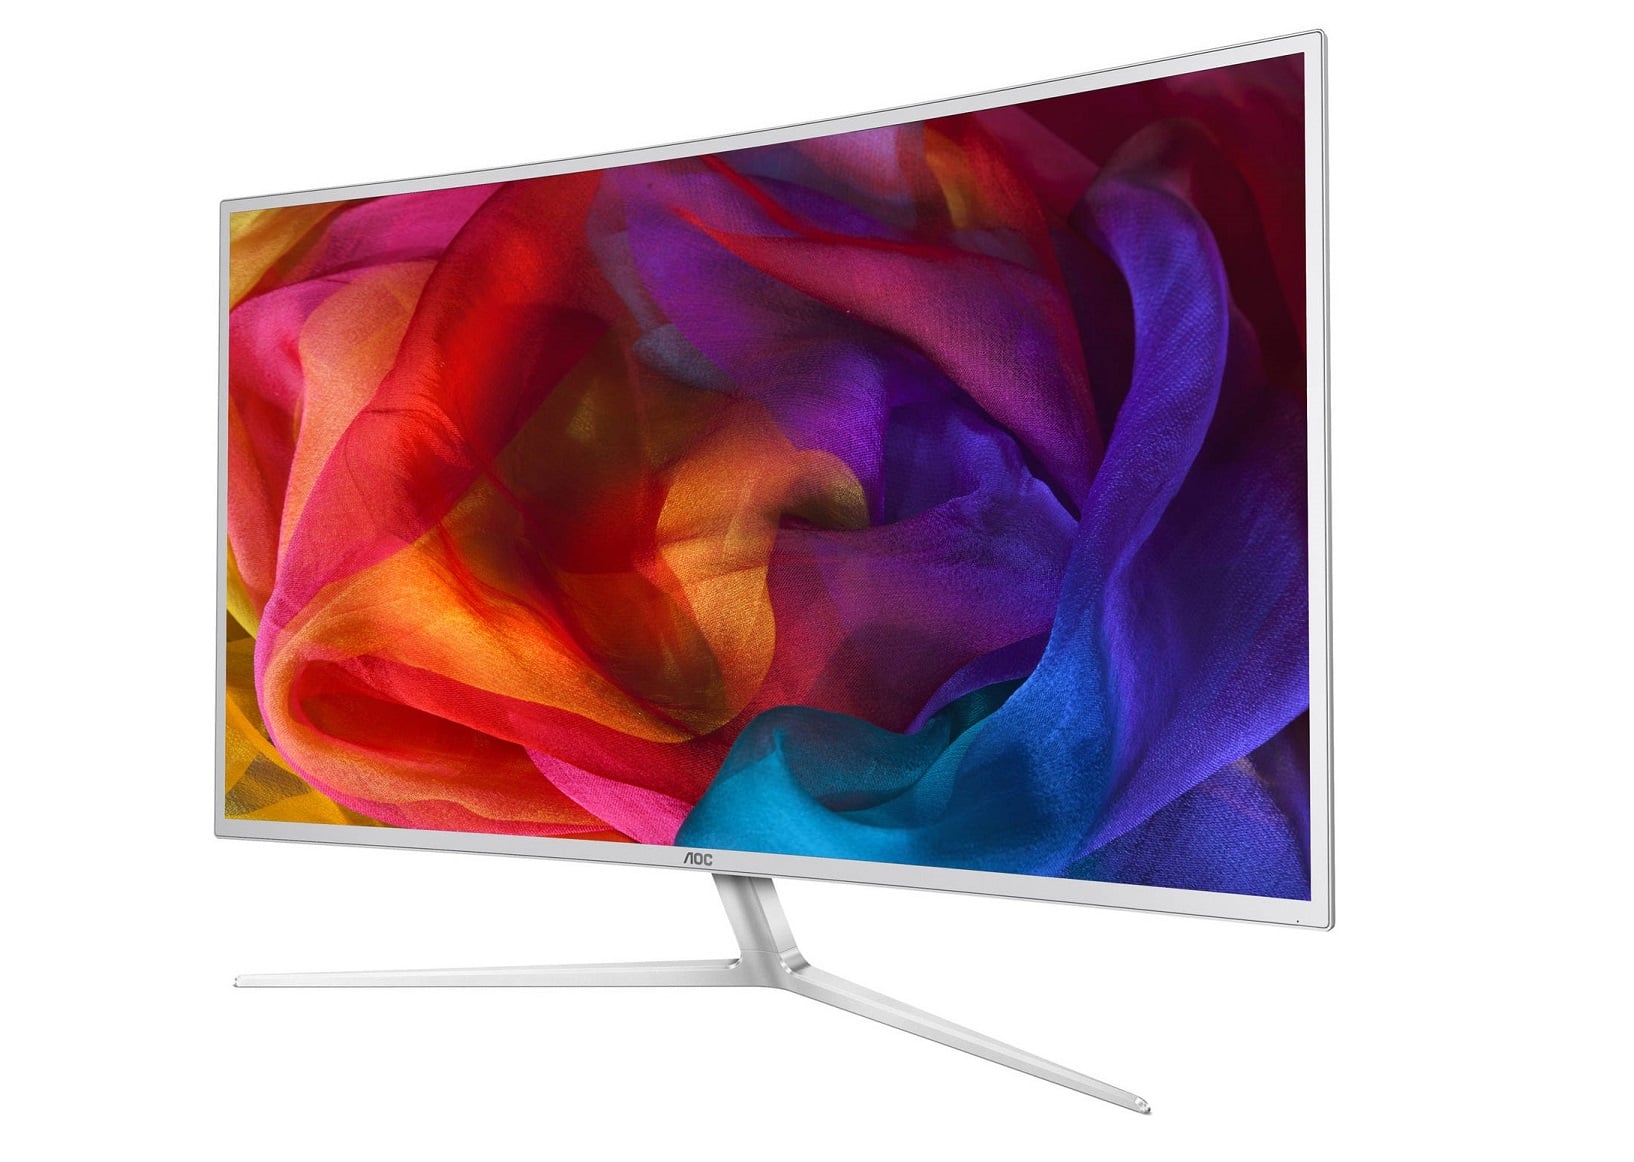 AOC Launches Monster 40-inch Curved 4K UHD 10-bit MVA Panel Monitor